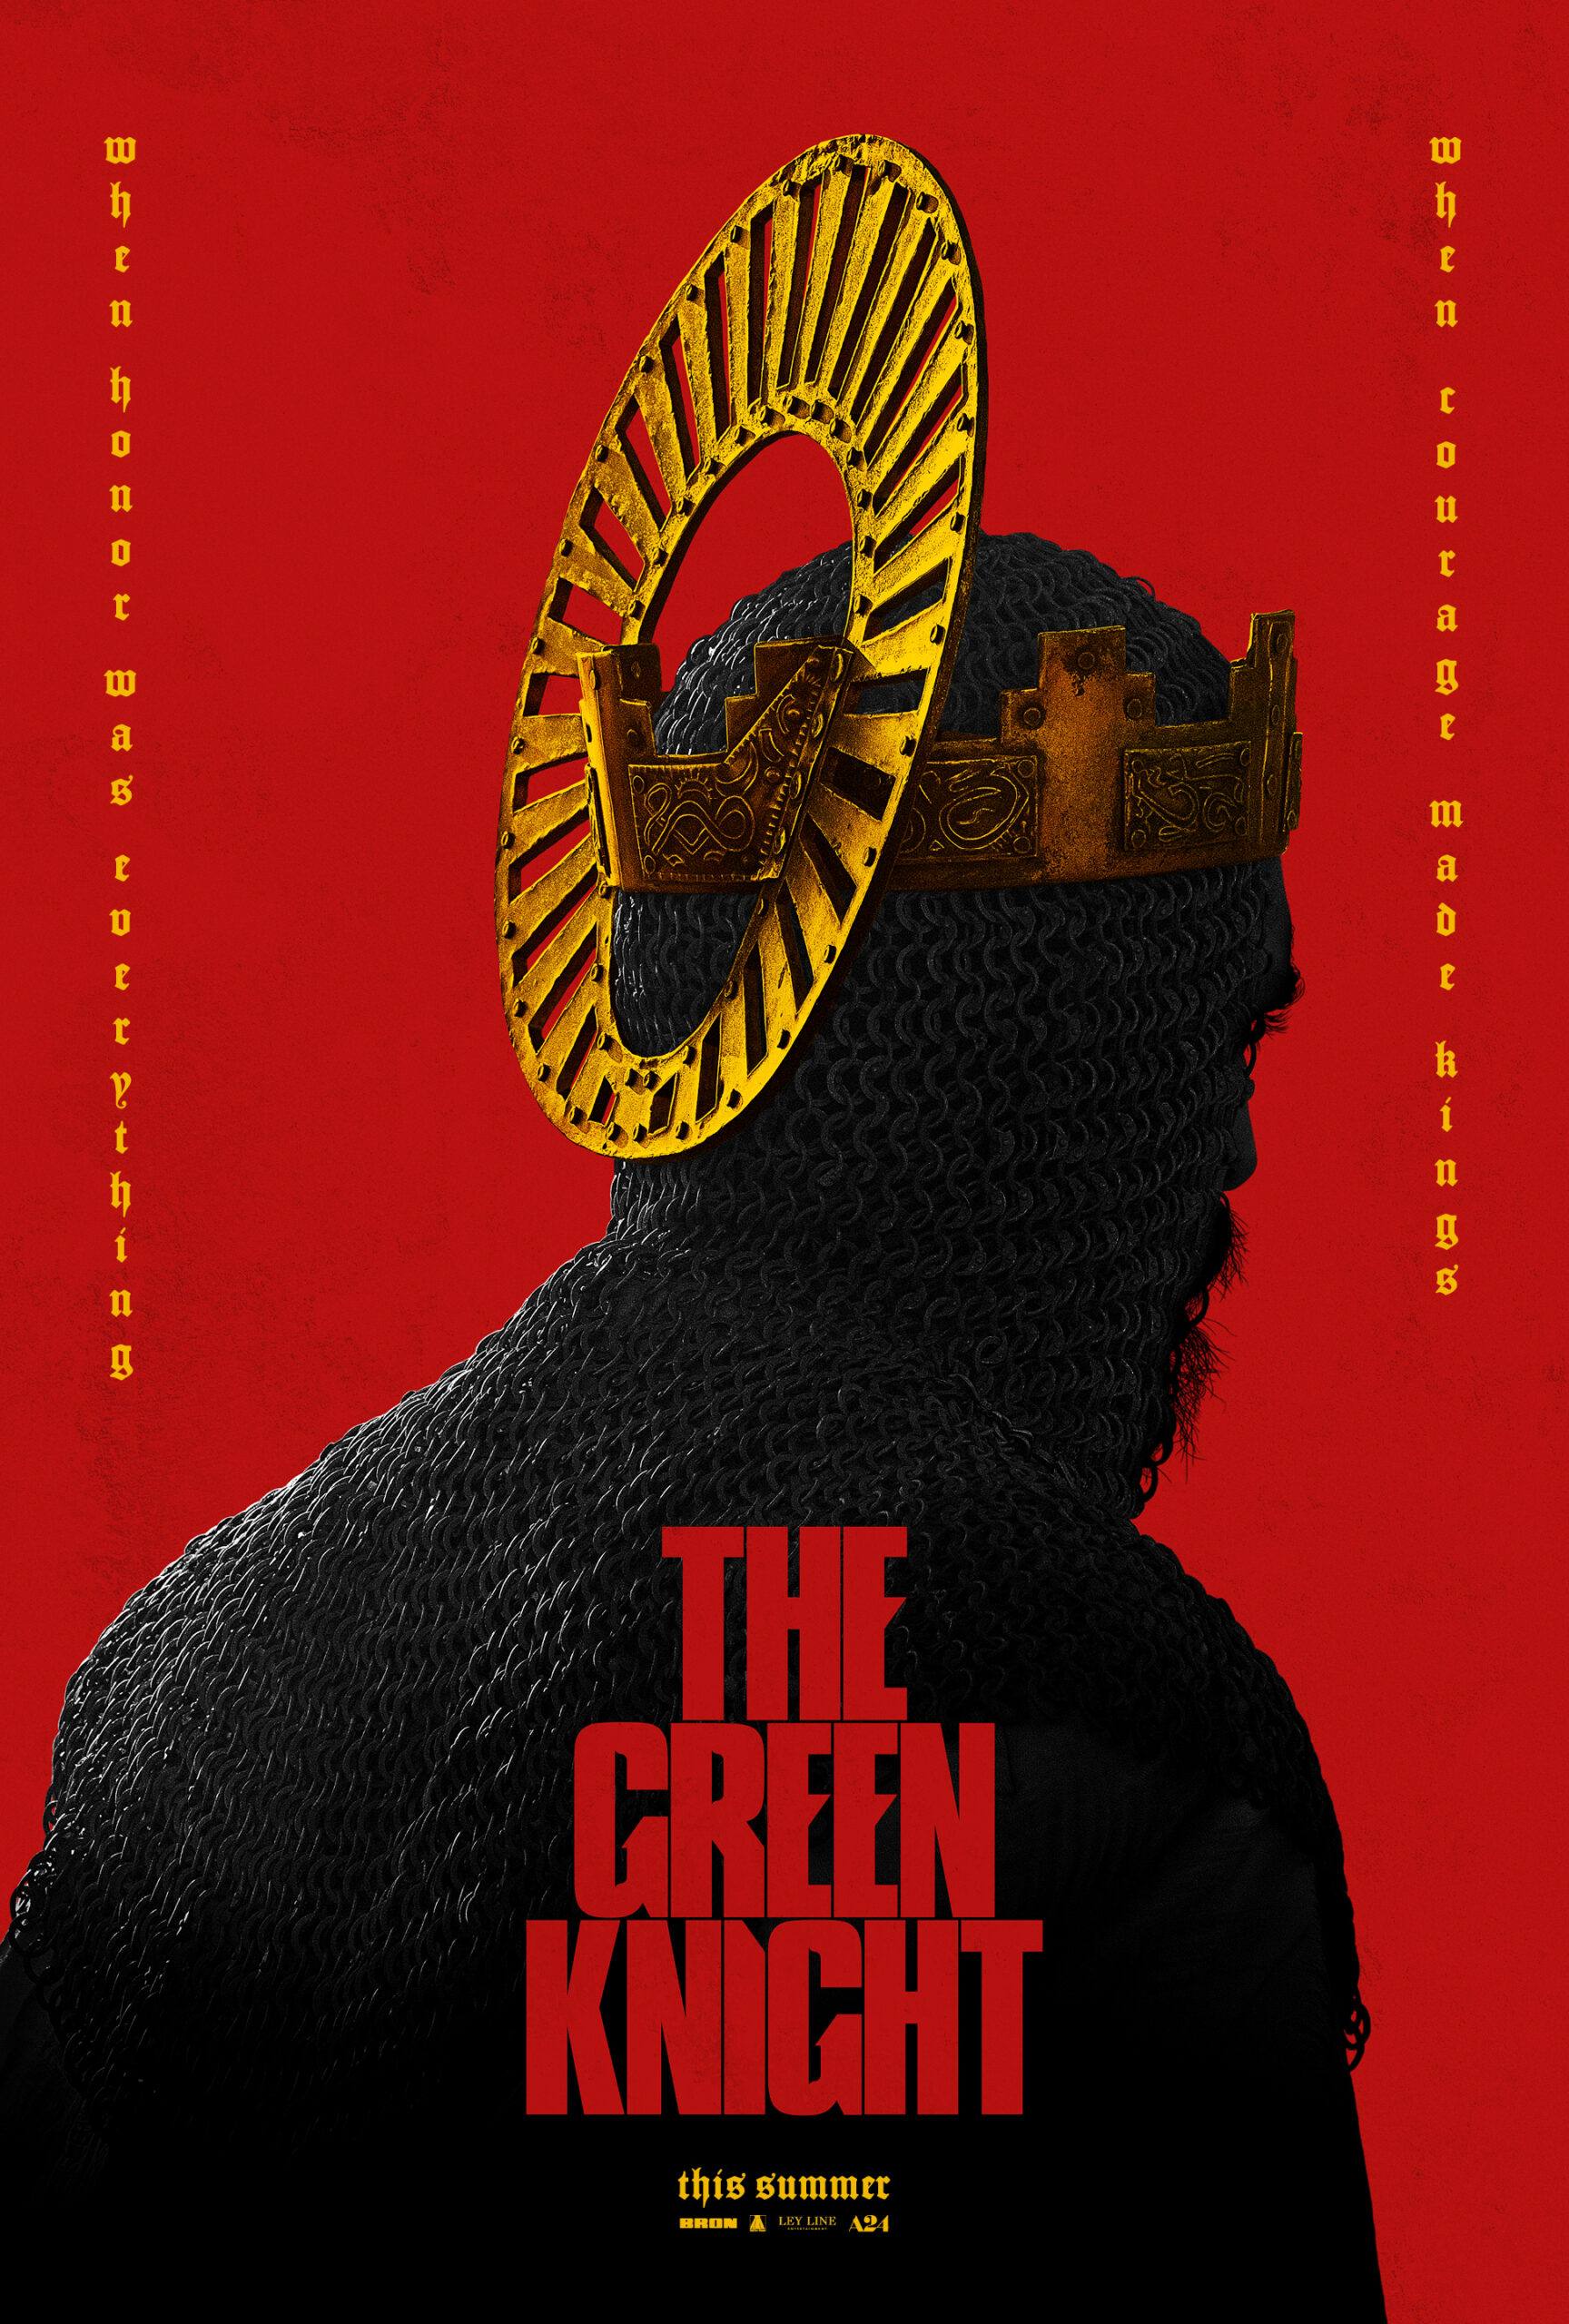 The Green Knight - Best and Worst Films of 2021